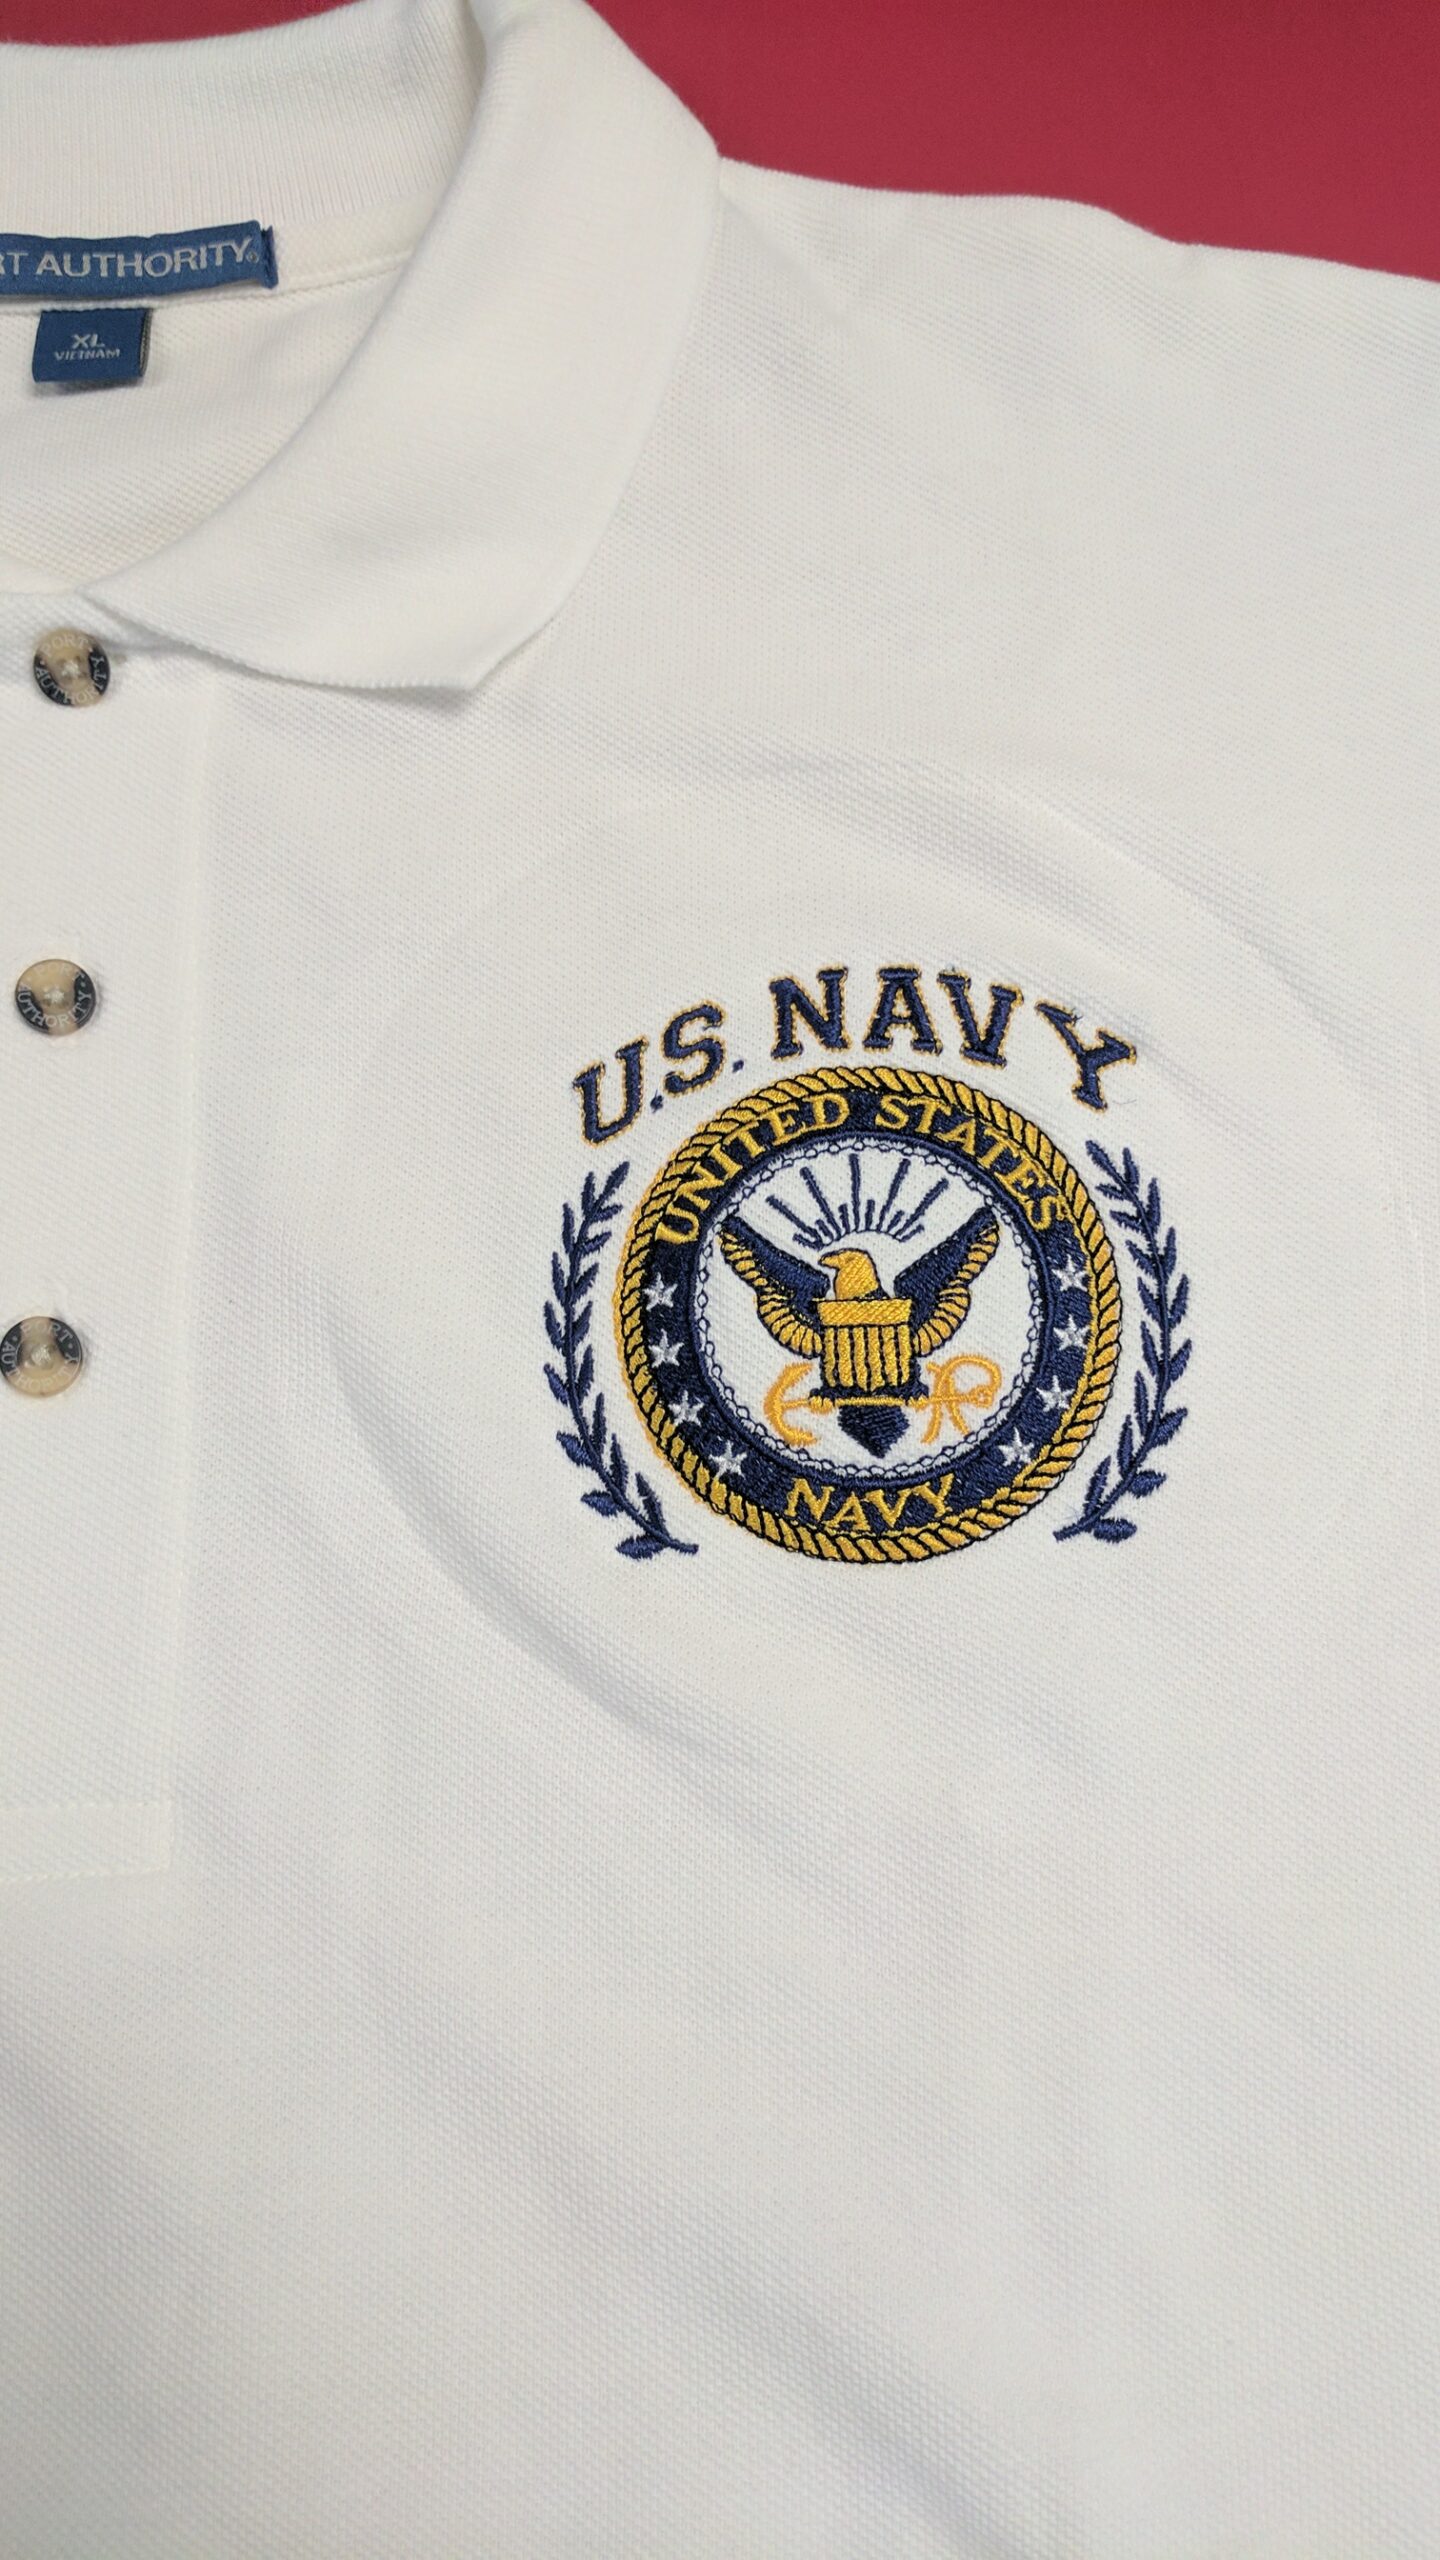 NAVY LOGO - Hines DTF / DTG AND CUSTOM PRINTING & Embroidery